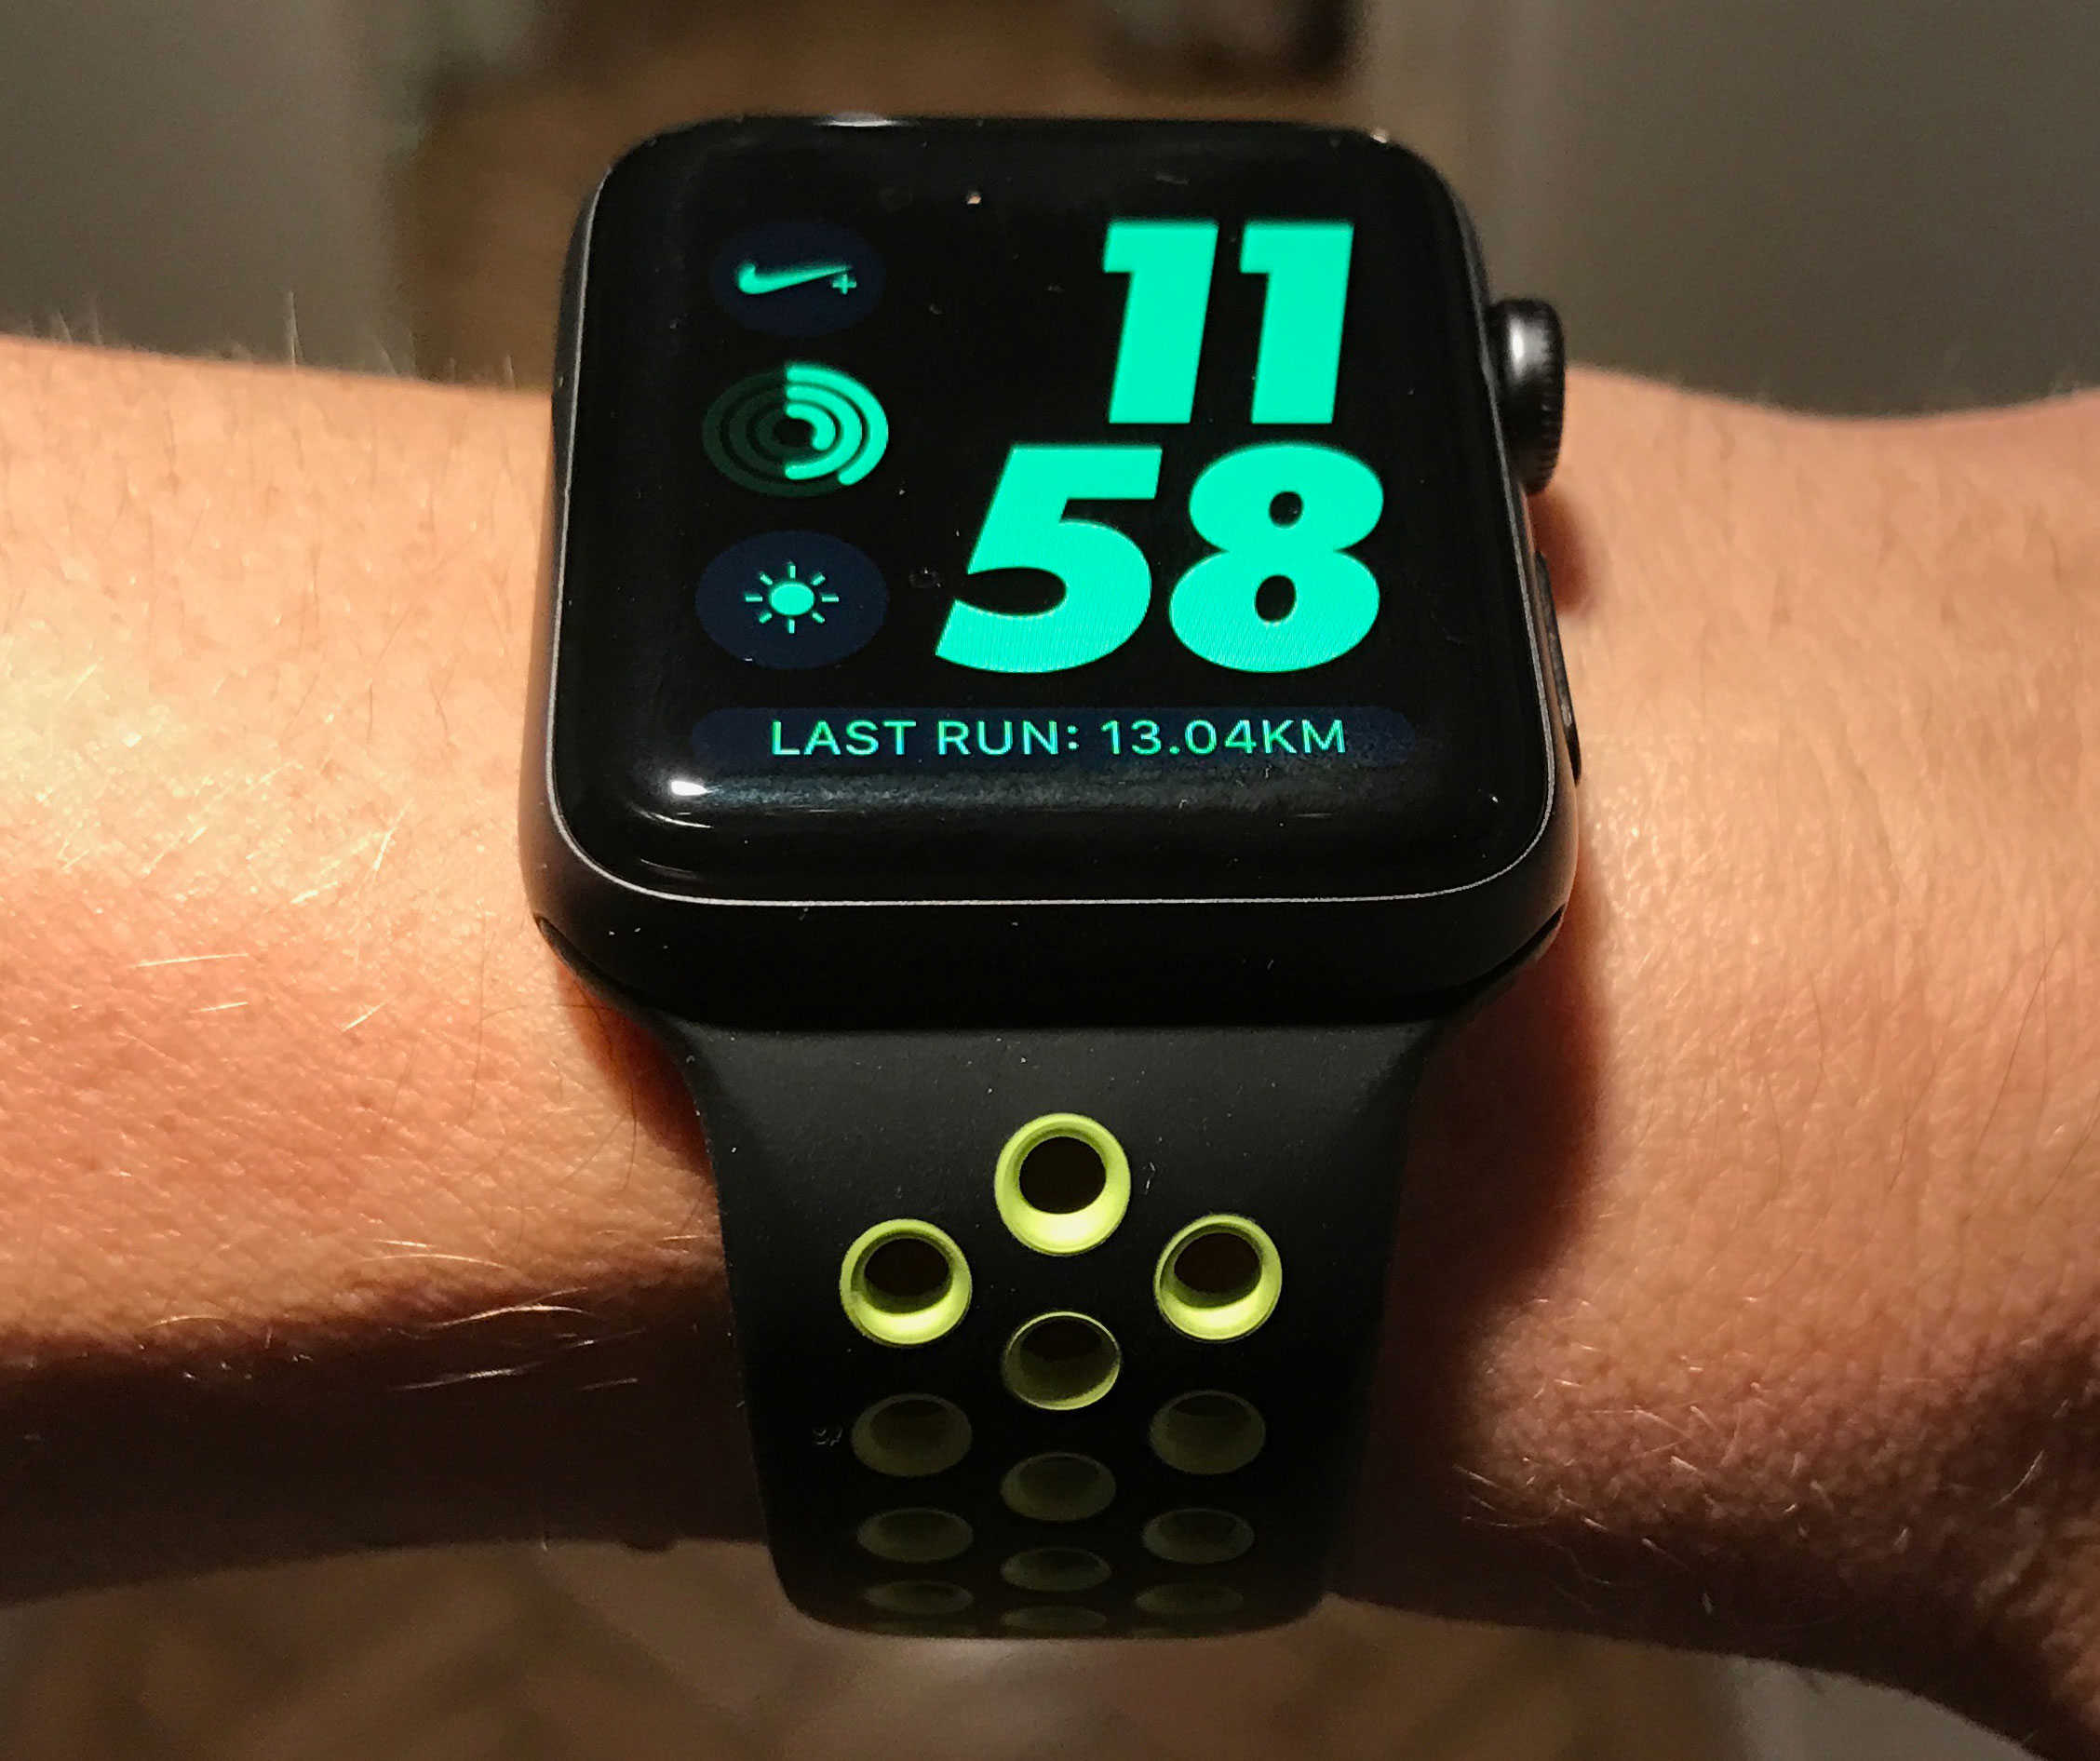 In artificial light, the Volt color of the display and strap does not match